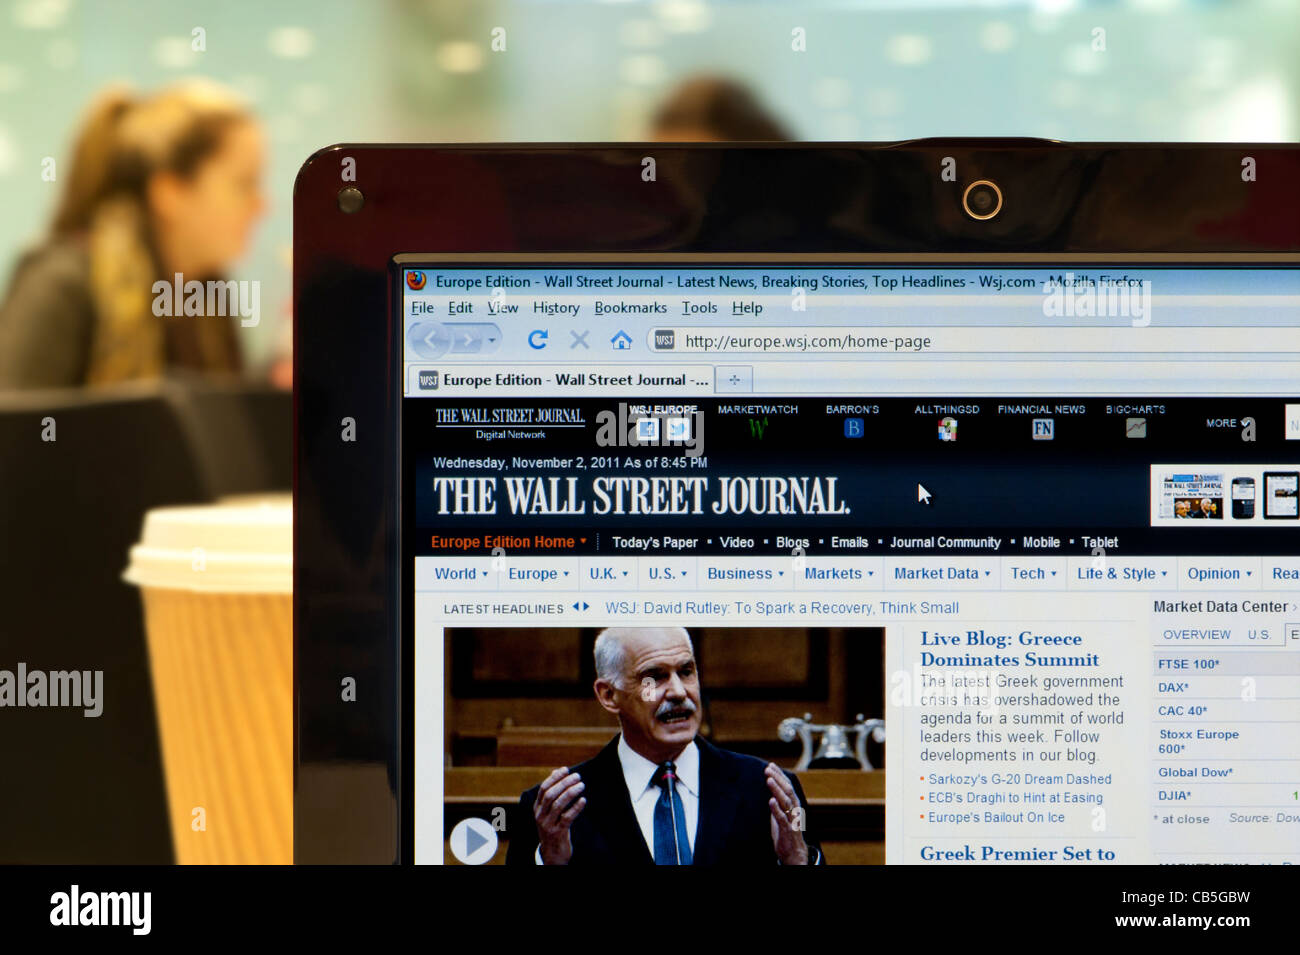 The Wall Street Journal website shot in a coffee shop environment (Editorial use only: print, TV,e-book and editorial website). Stock Photo